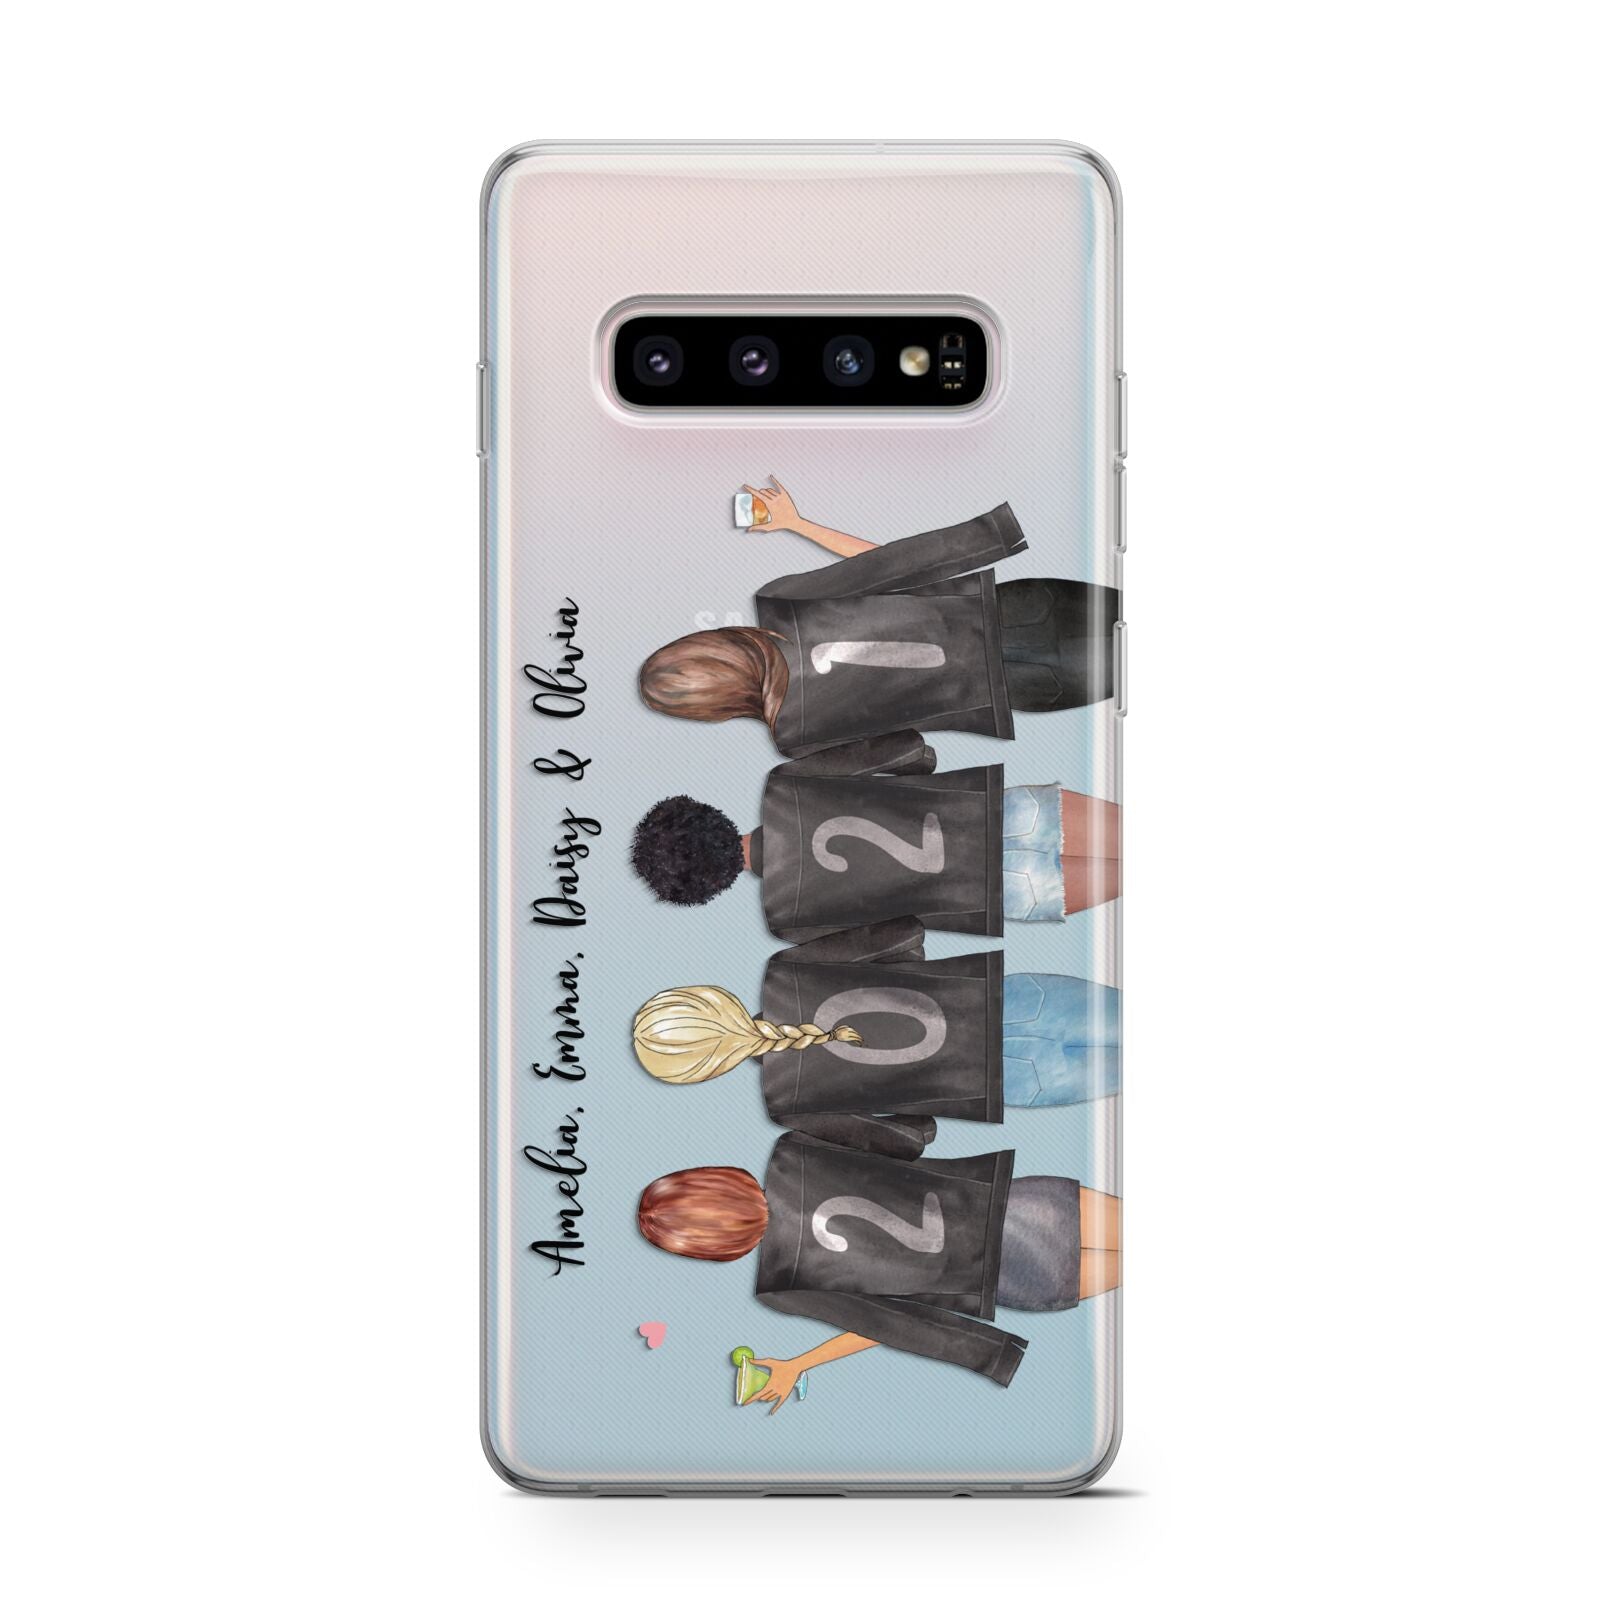 4 Best Friends with Names Samsung Galaxy S10 Case